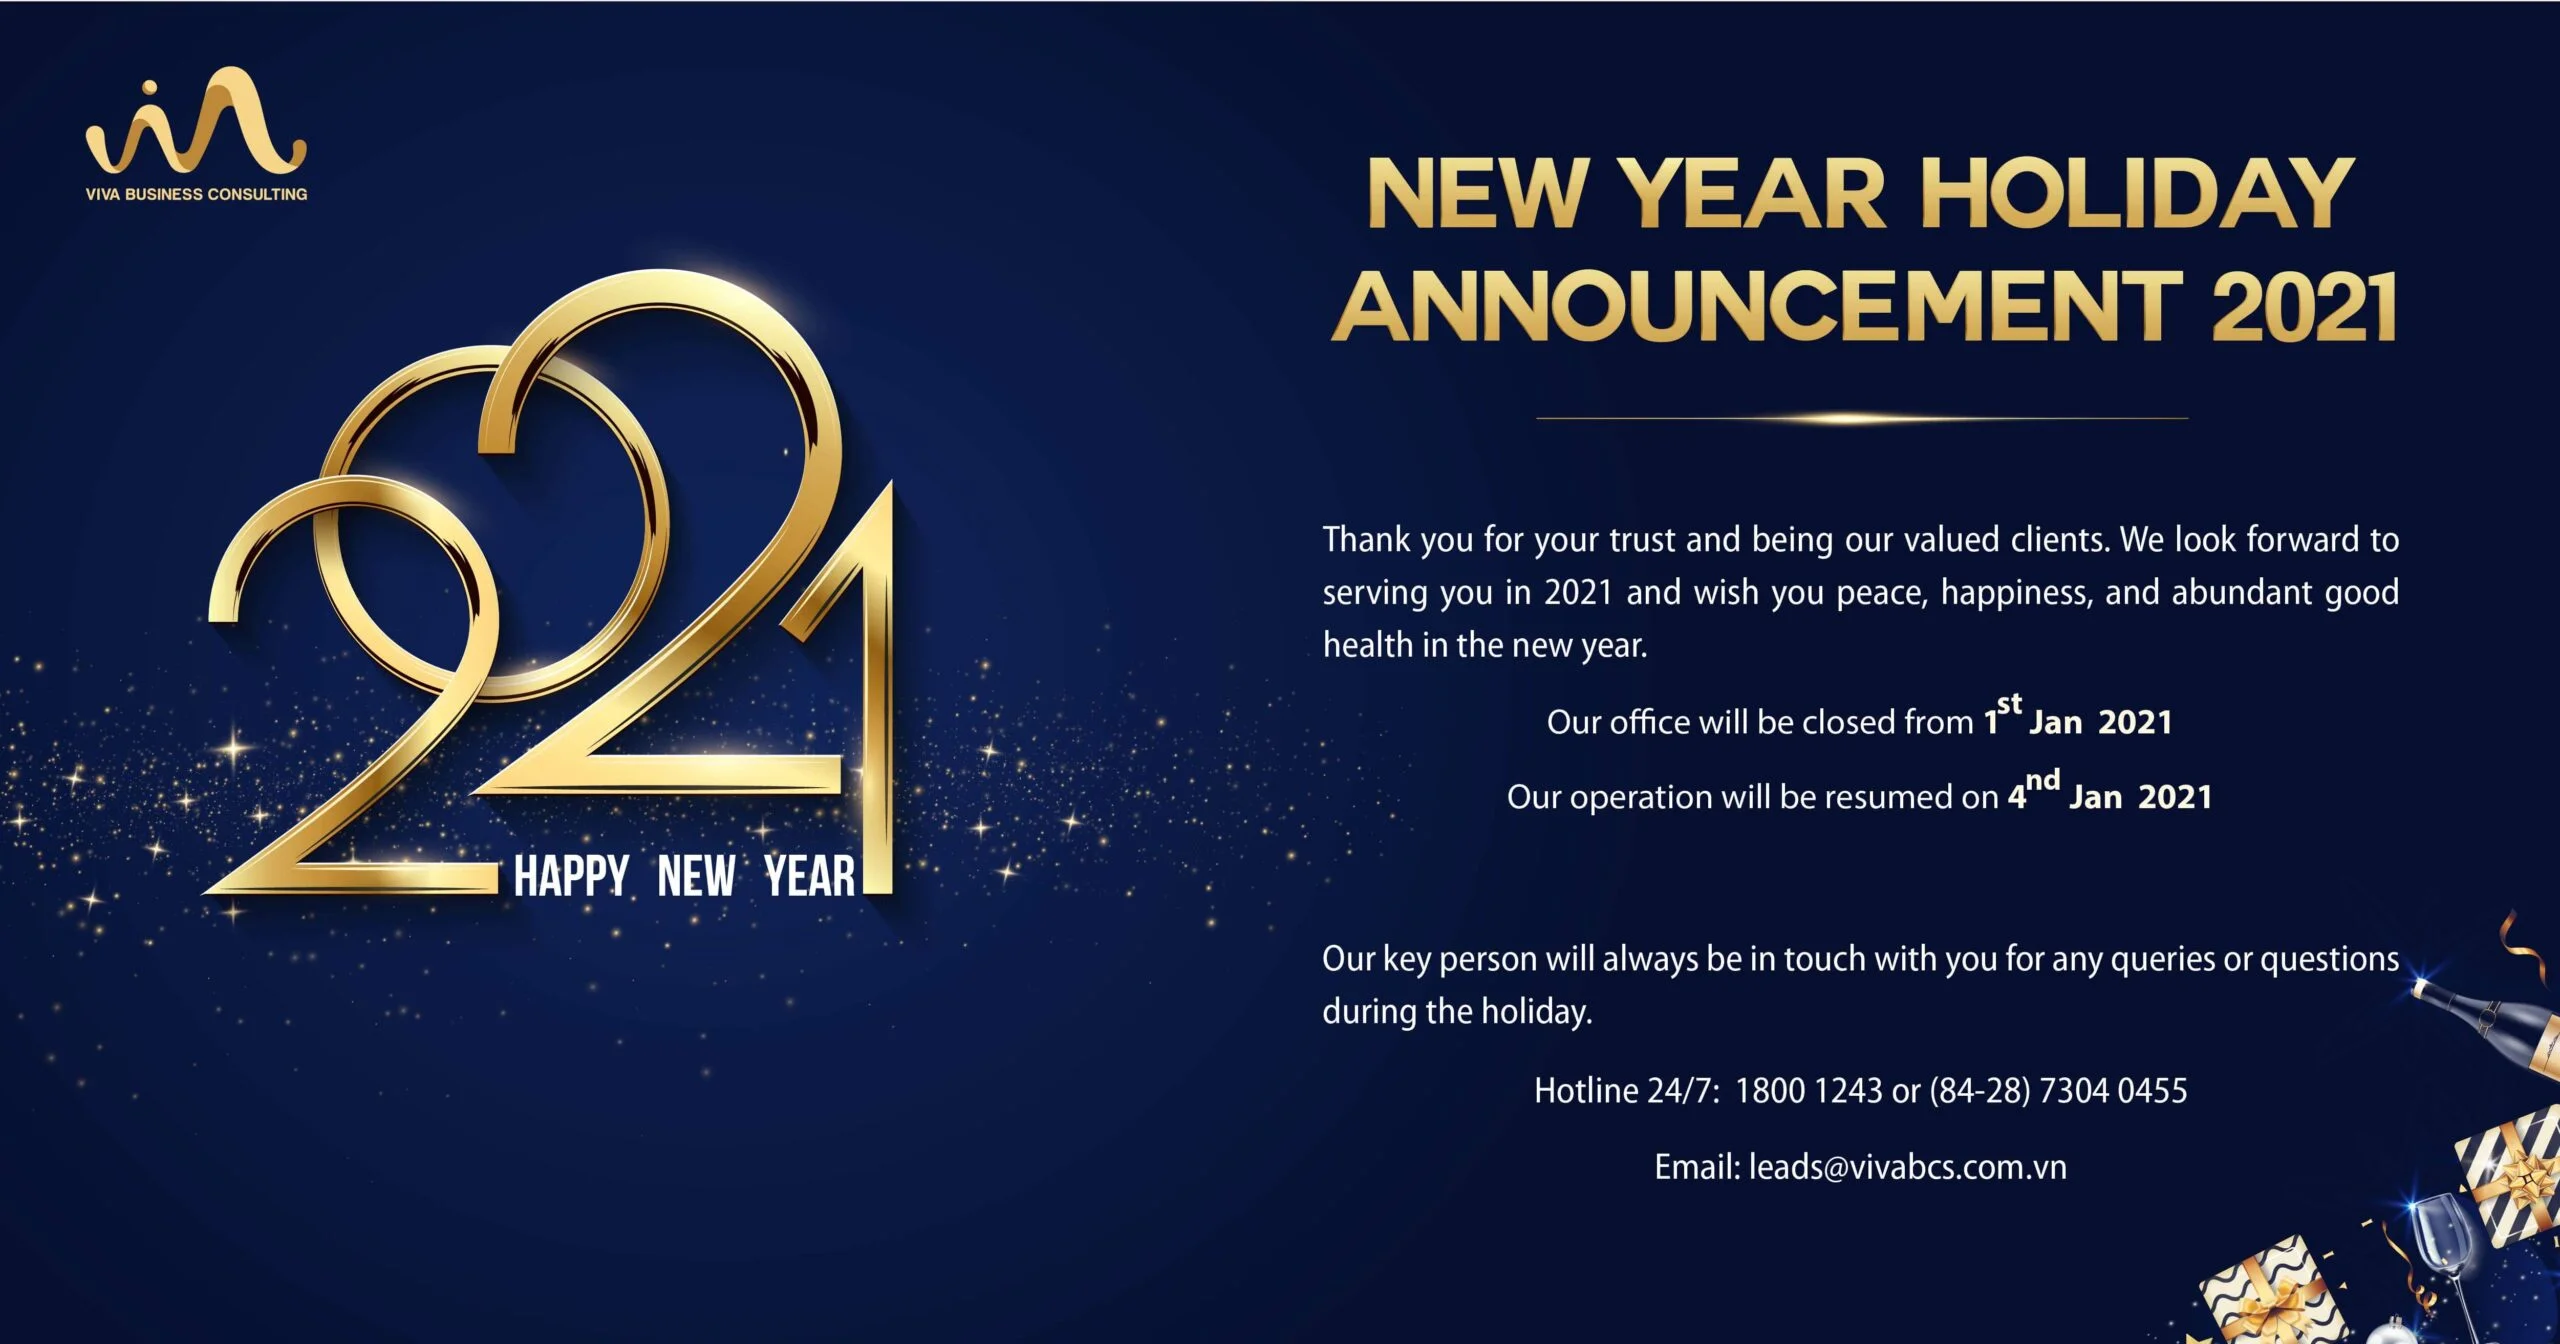 NEW YEAR HOLIDAY ANNOUNCEMENT 2021